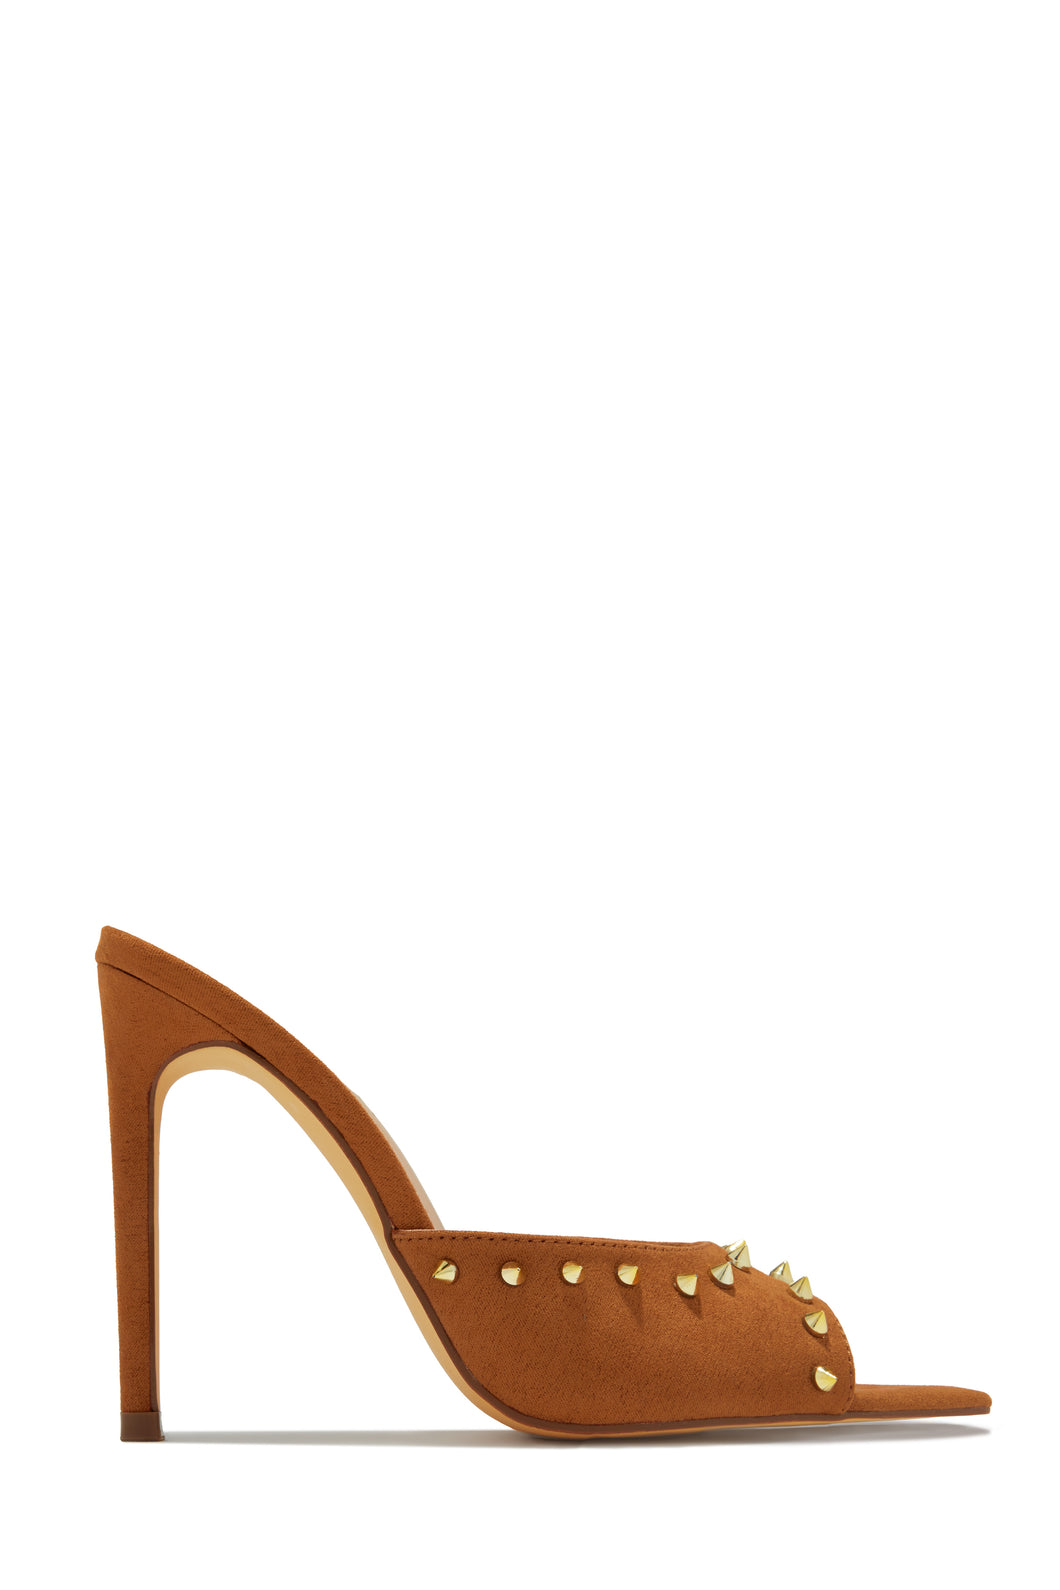 Collette Studded High Heel Mules - Tan